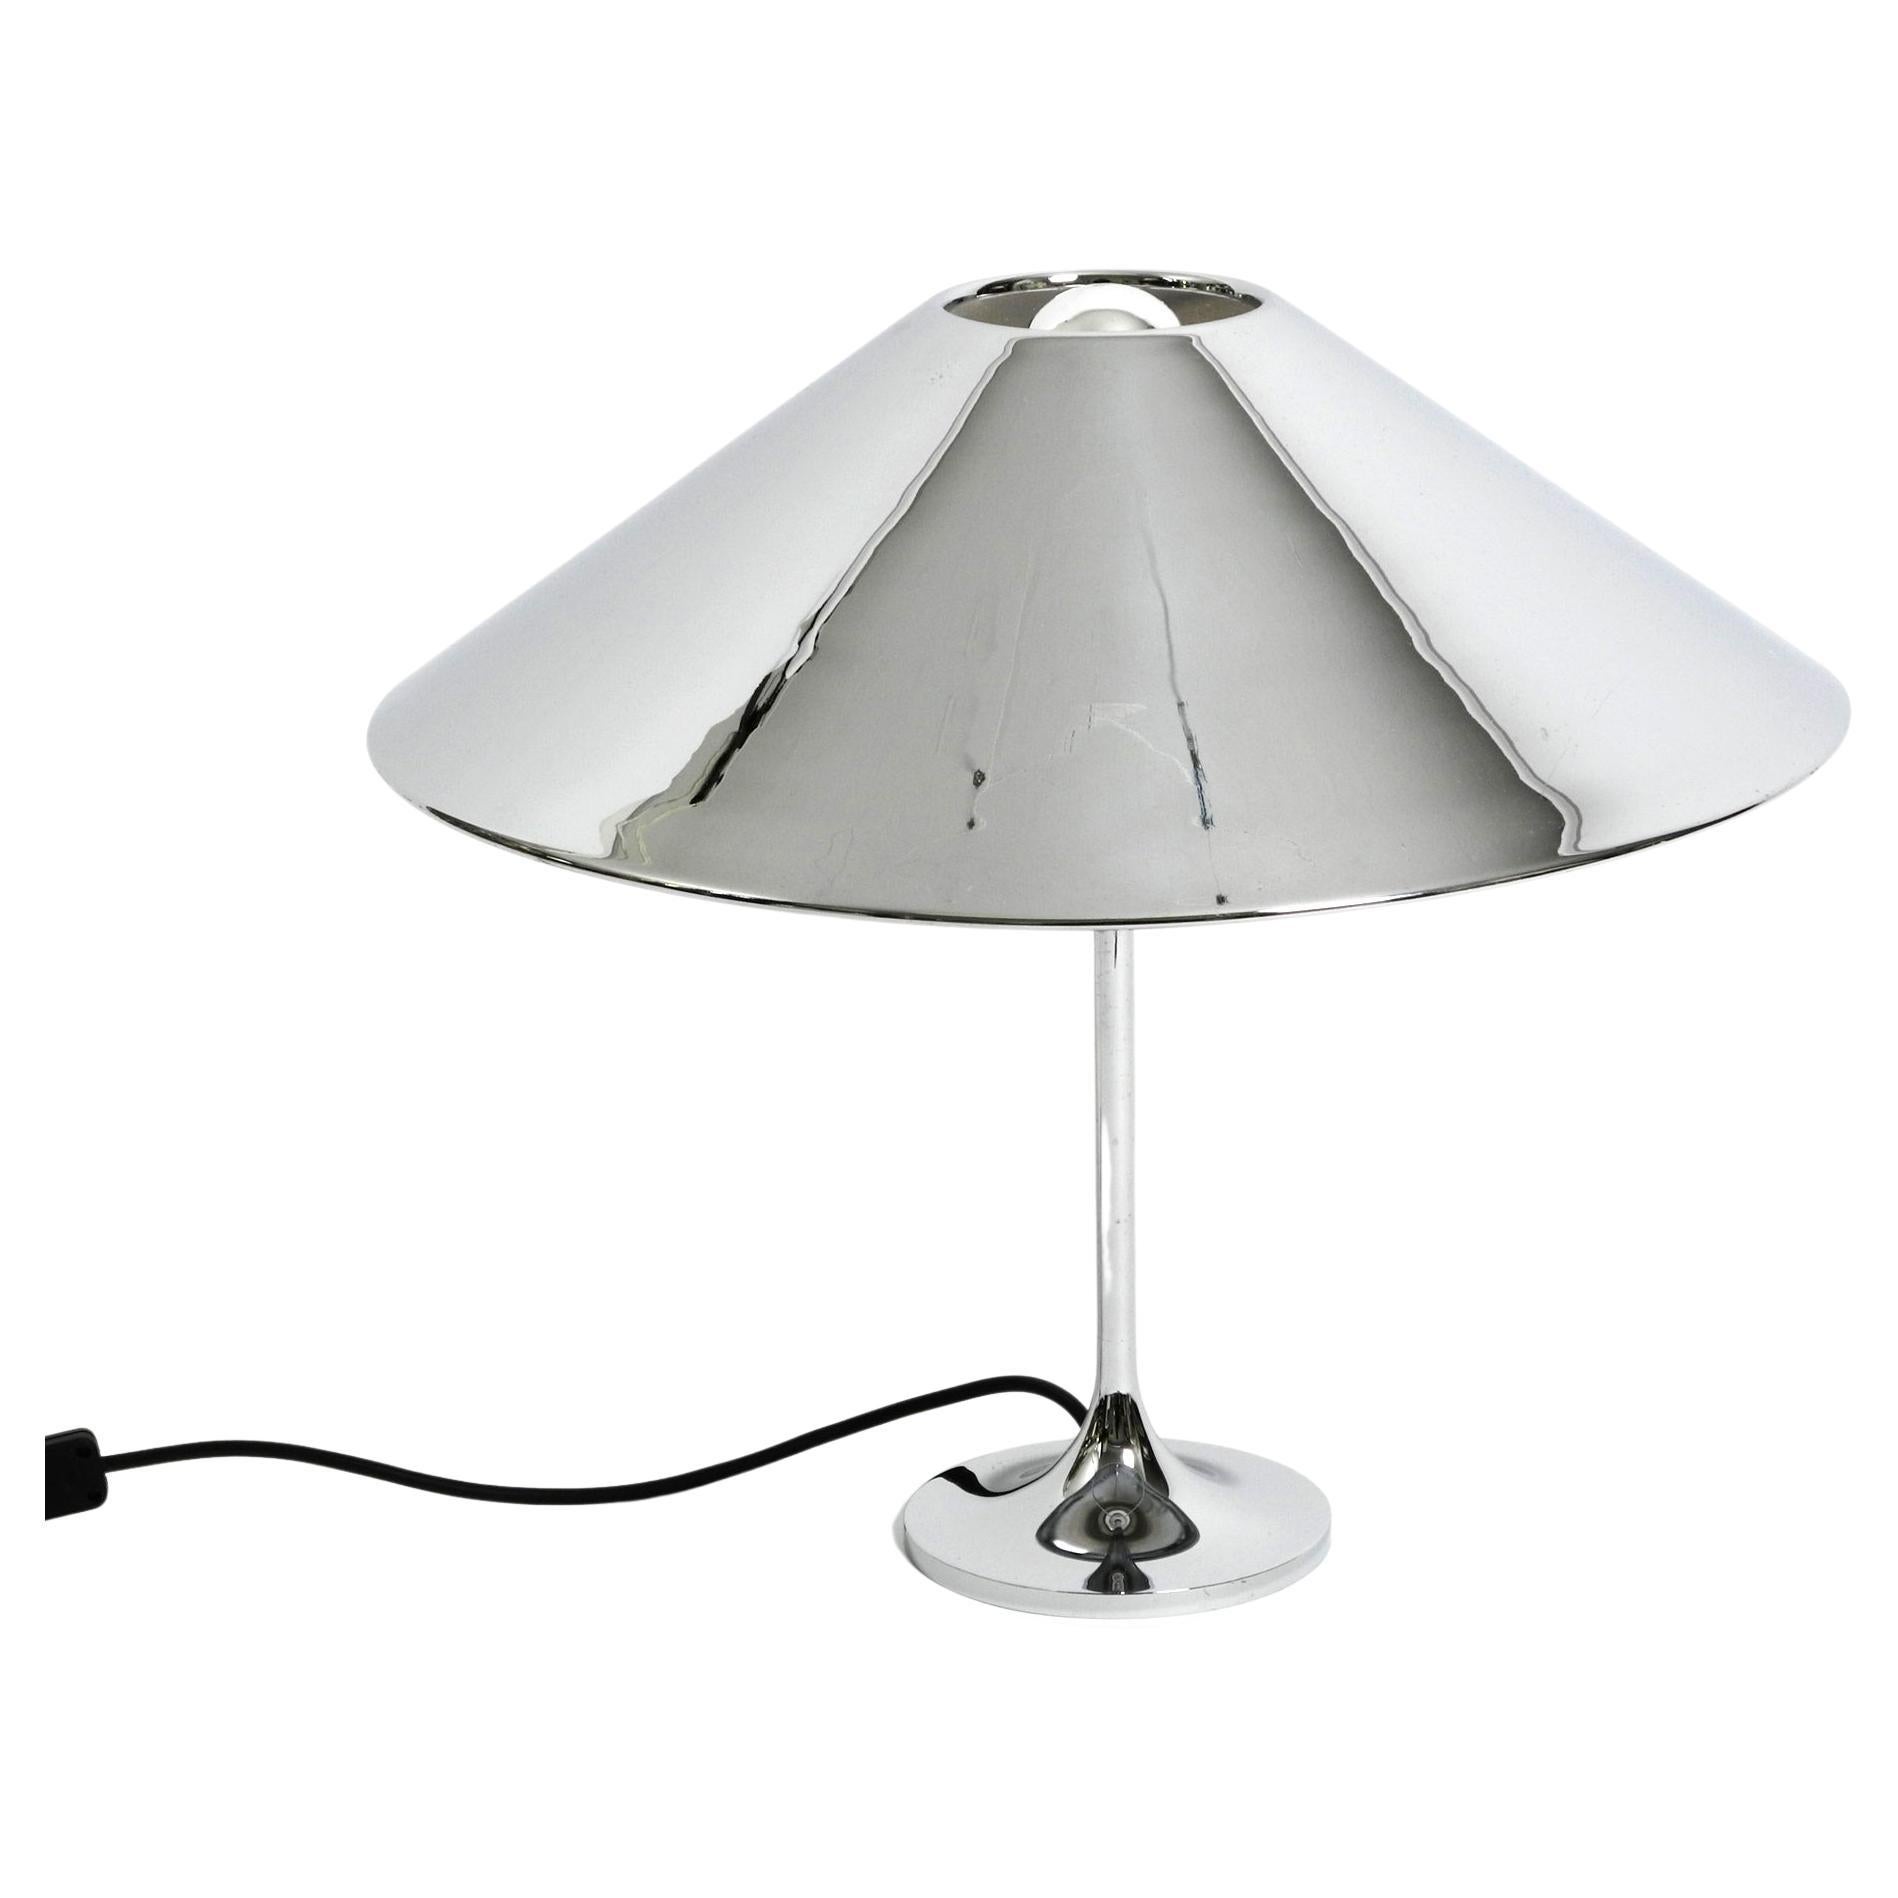 Large, Heavy 70s Metal Chrome Table Lamp with a Metal Shade in a Classic  Design at 1stDibs | chrome lamp shade, metal shade table lamp, table lamp  with metal shade